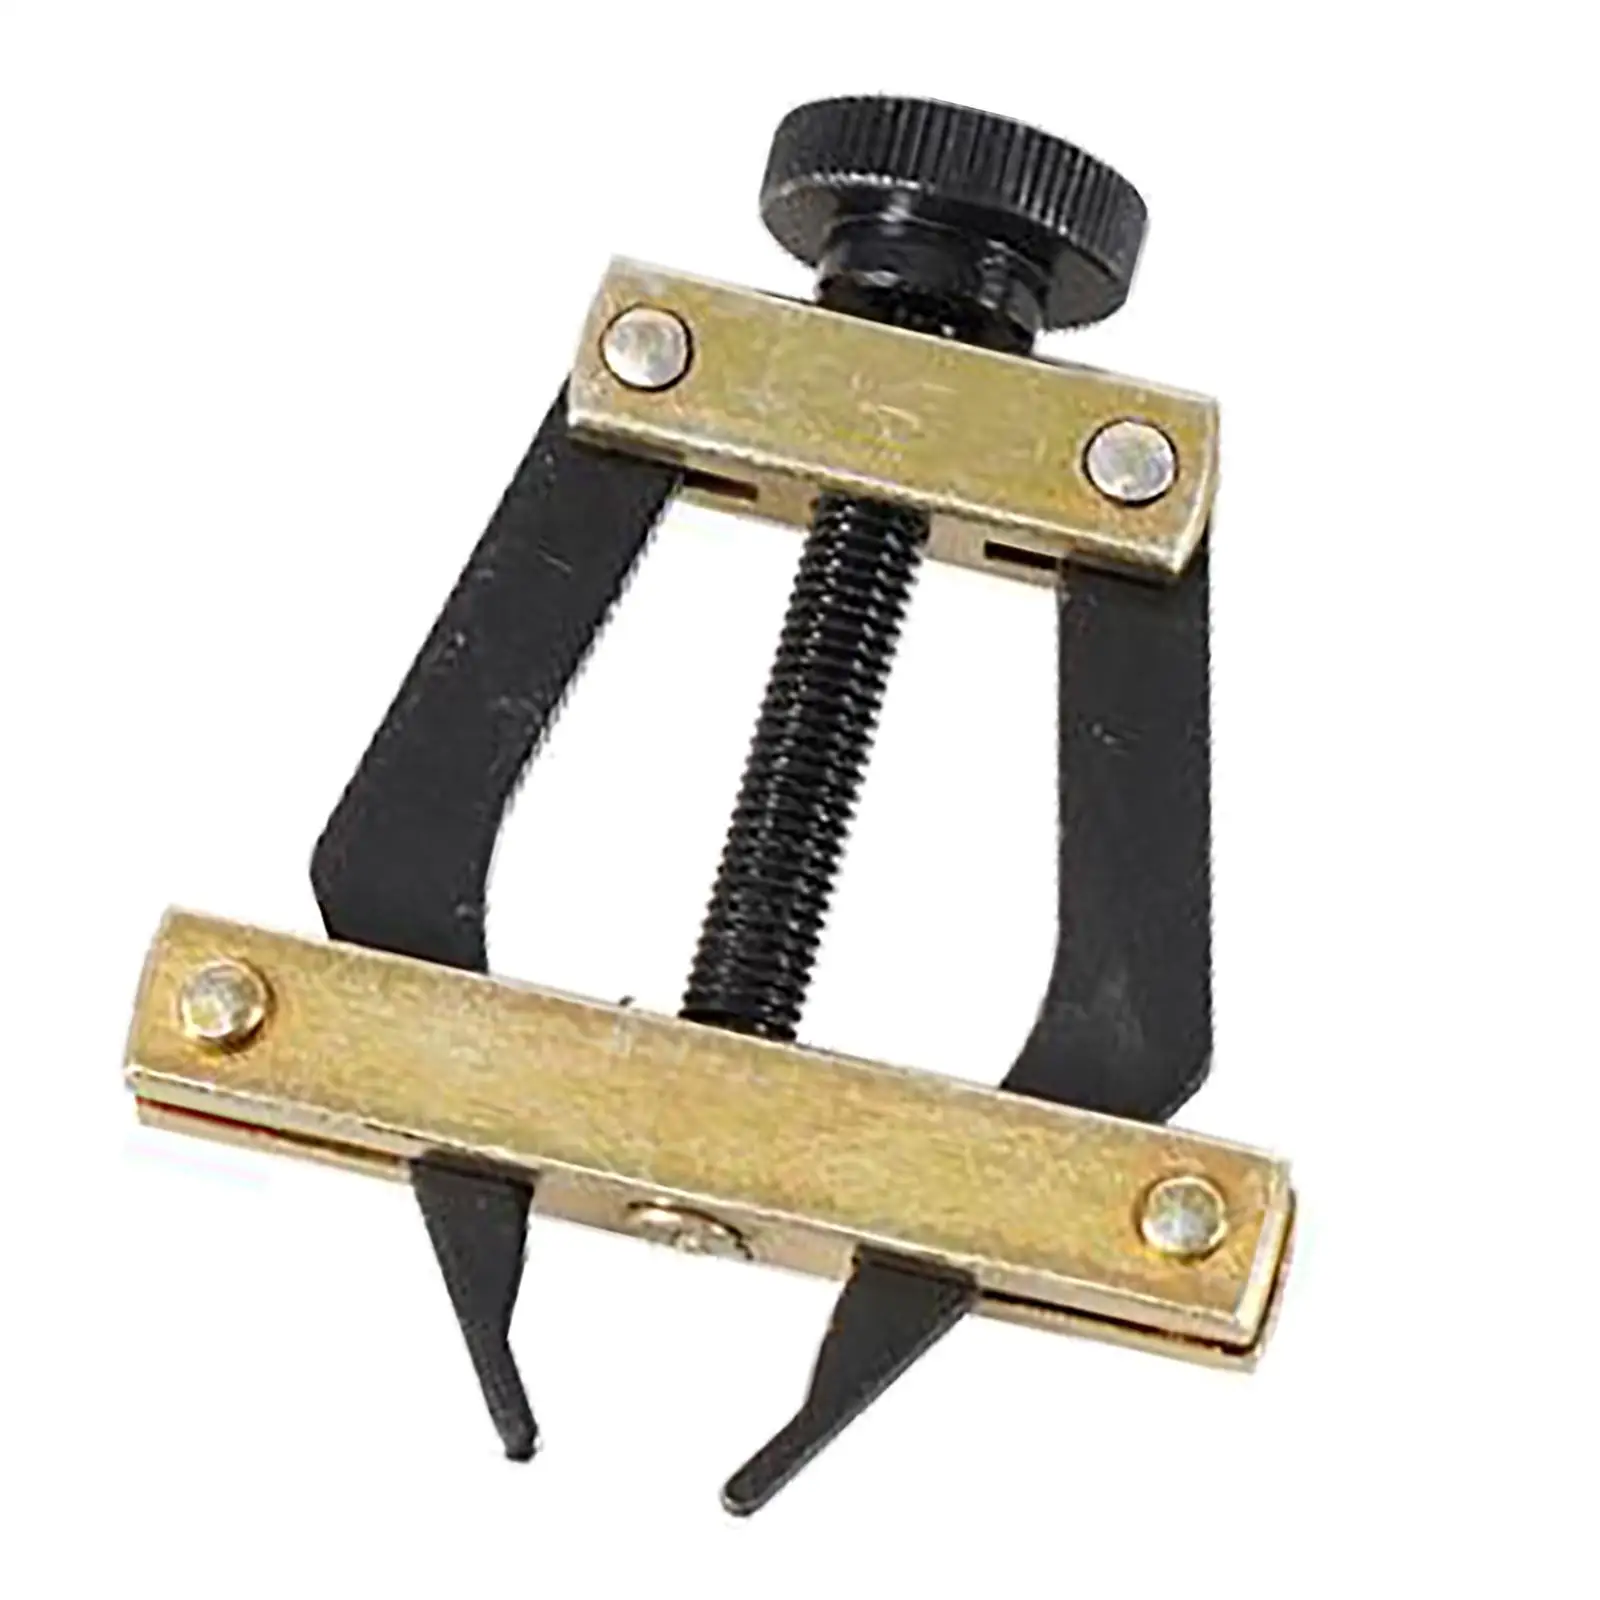 Carbon Steel Chain Puller for Installing Roller Chain Fit for Chain #60, 80 and 100